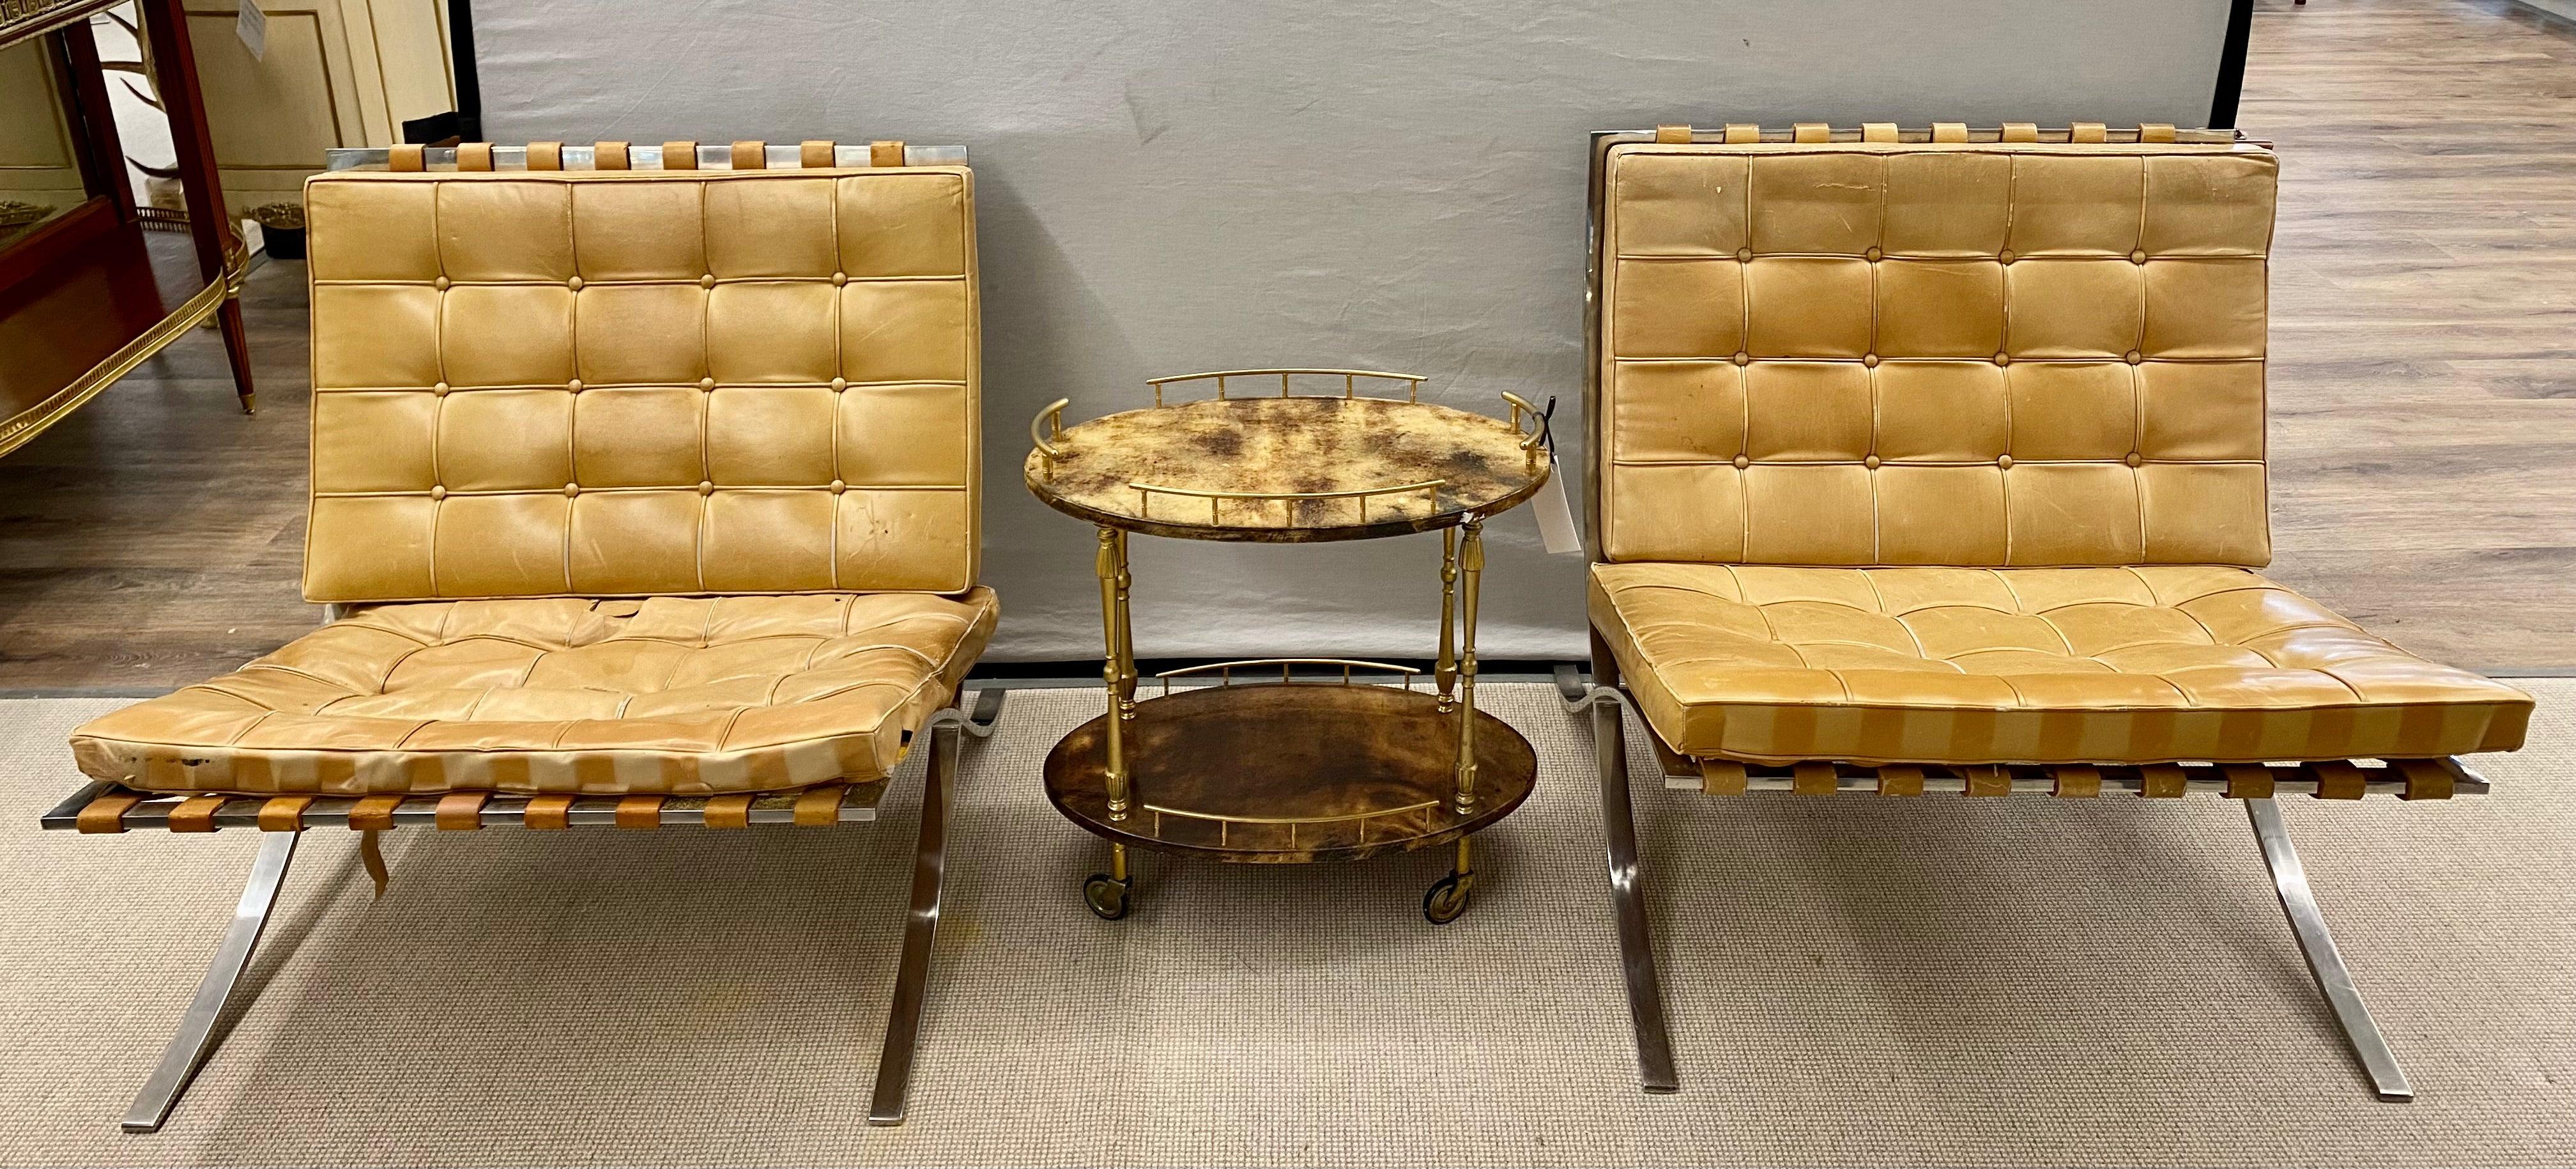 Ludwig Mies van der Rohe (German-American, 1886-1969) pair of Barcelona lounge chairs, Knoll International, USA
Steel, leather H 29 1/2 x W 29 1/4 x D 29 3/4 inches. Labeled. Need to be re upholstered/ cushions changed. Our gallery can assist with